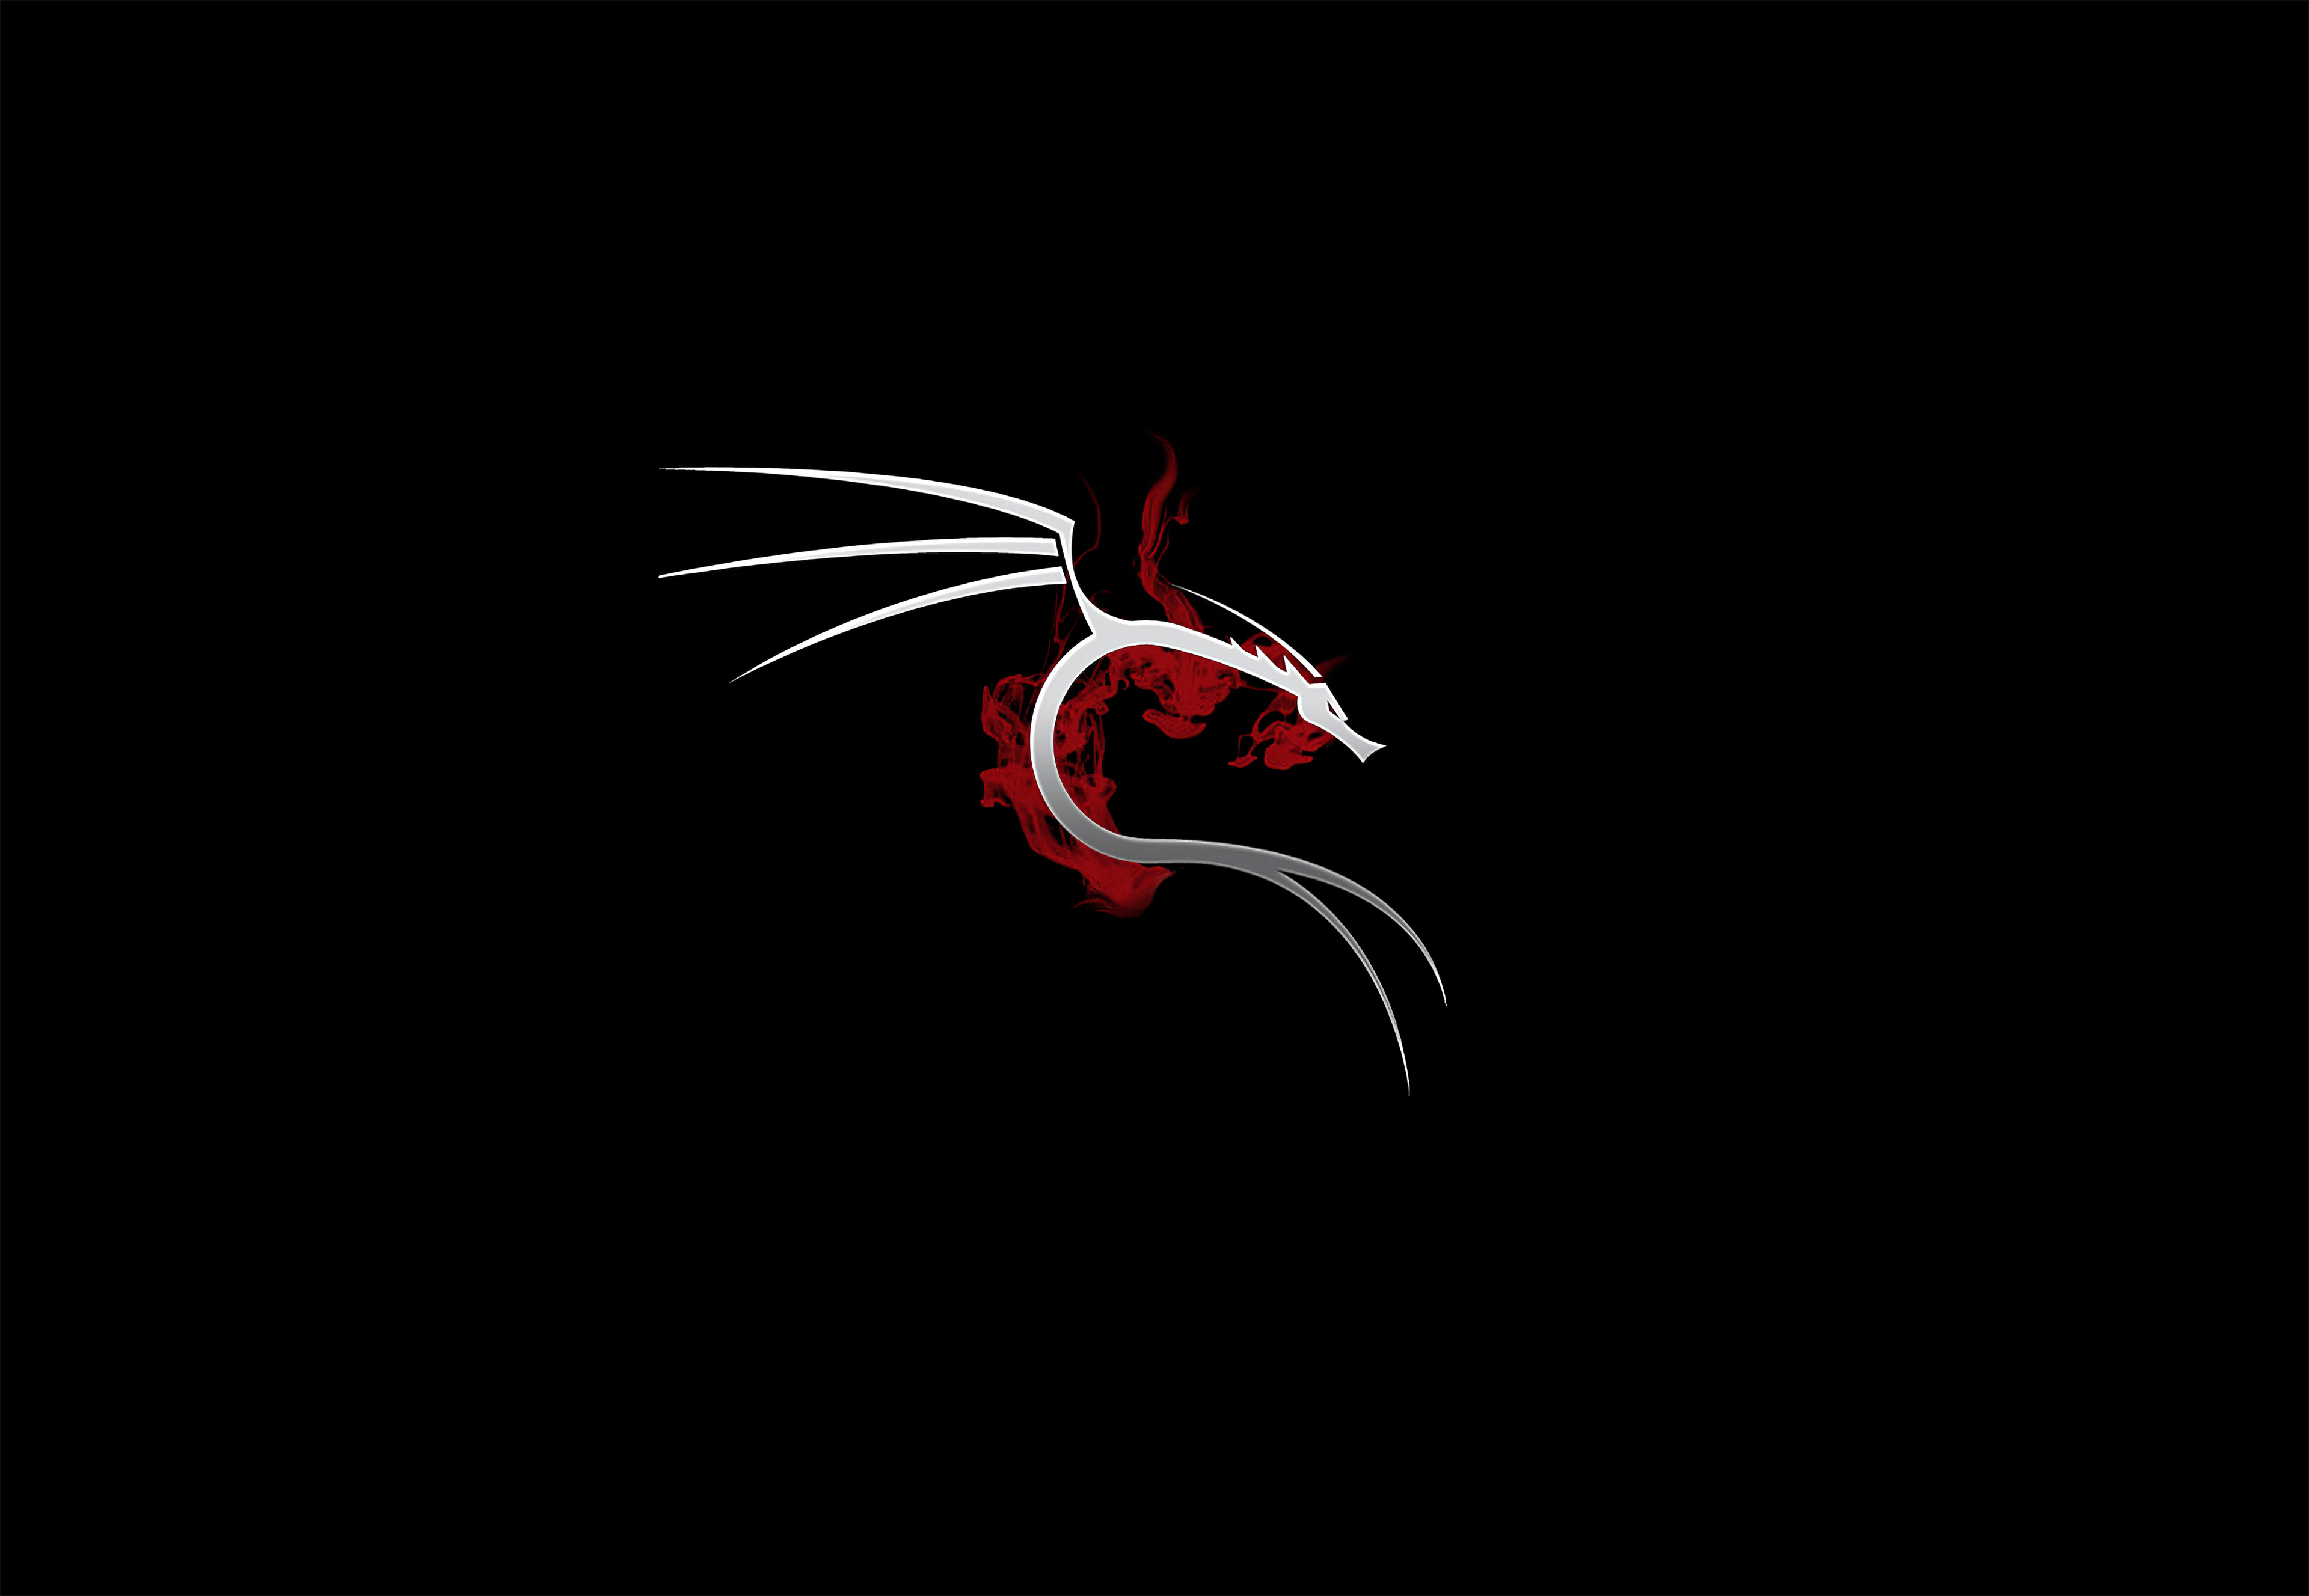 19x10 Kali Linux 4k 1080p Resolution Hd 4k Wallpapers Images Backgrounds Photos And Pictures